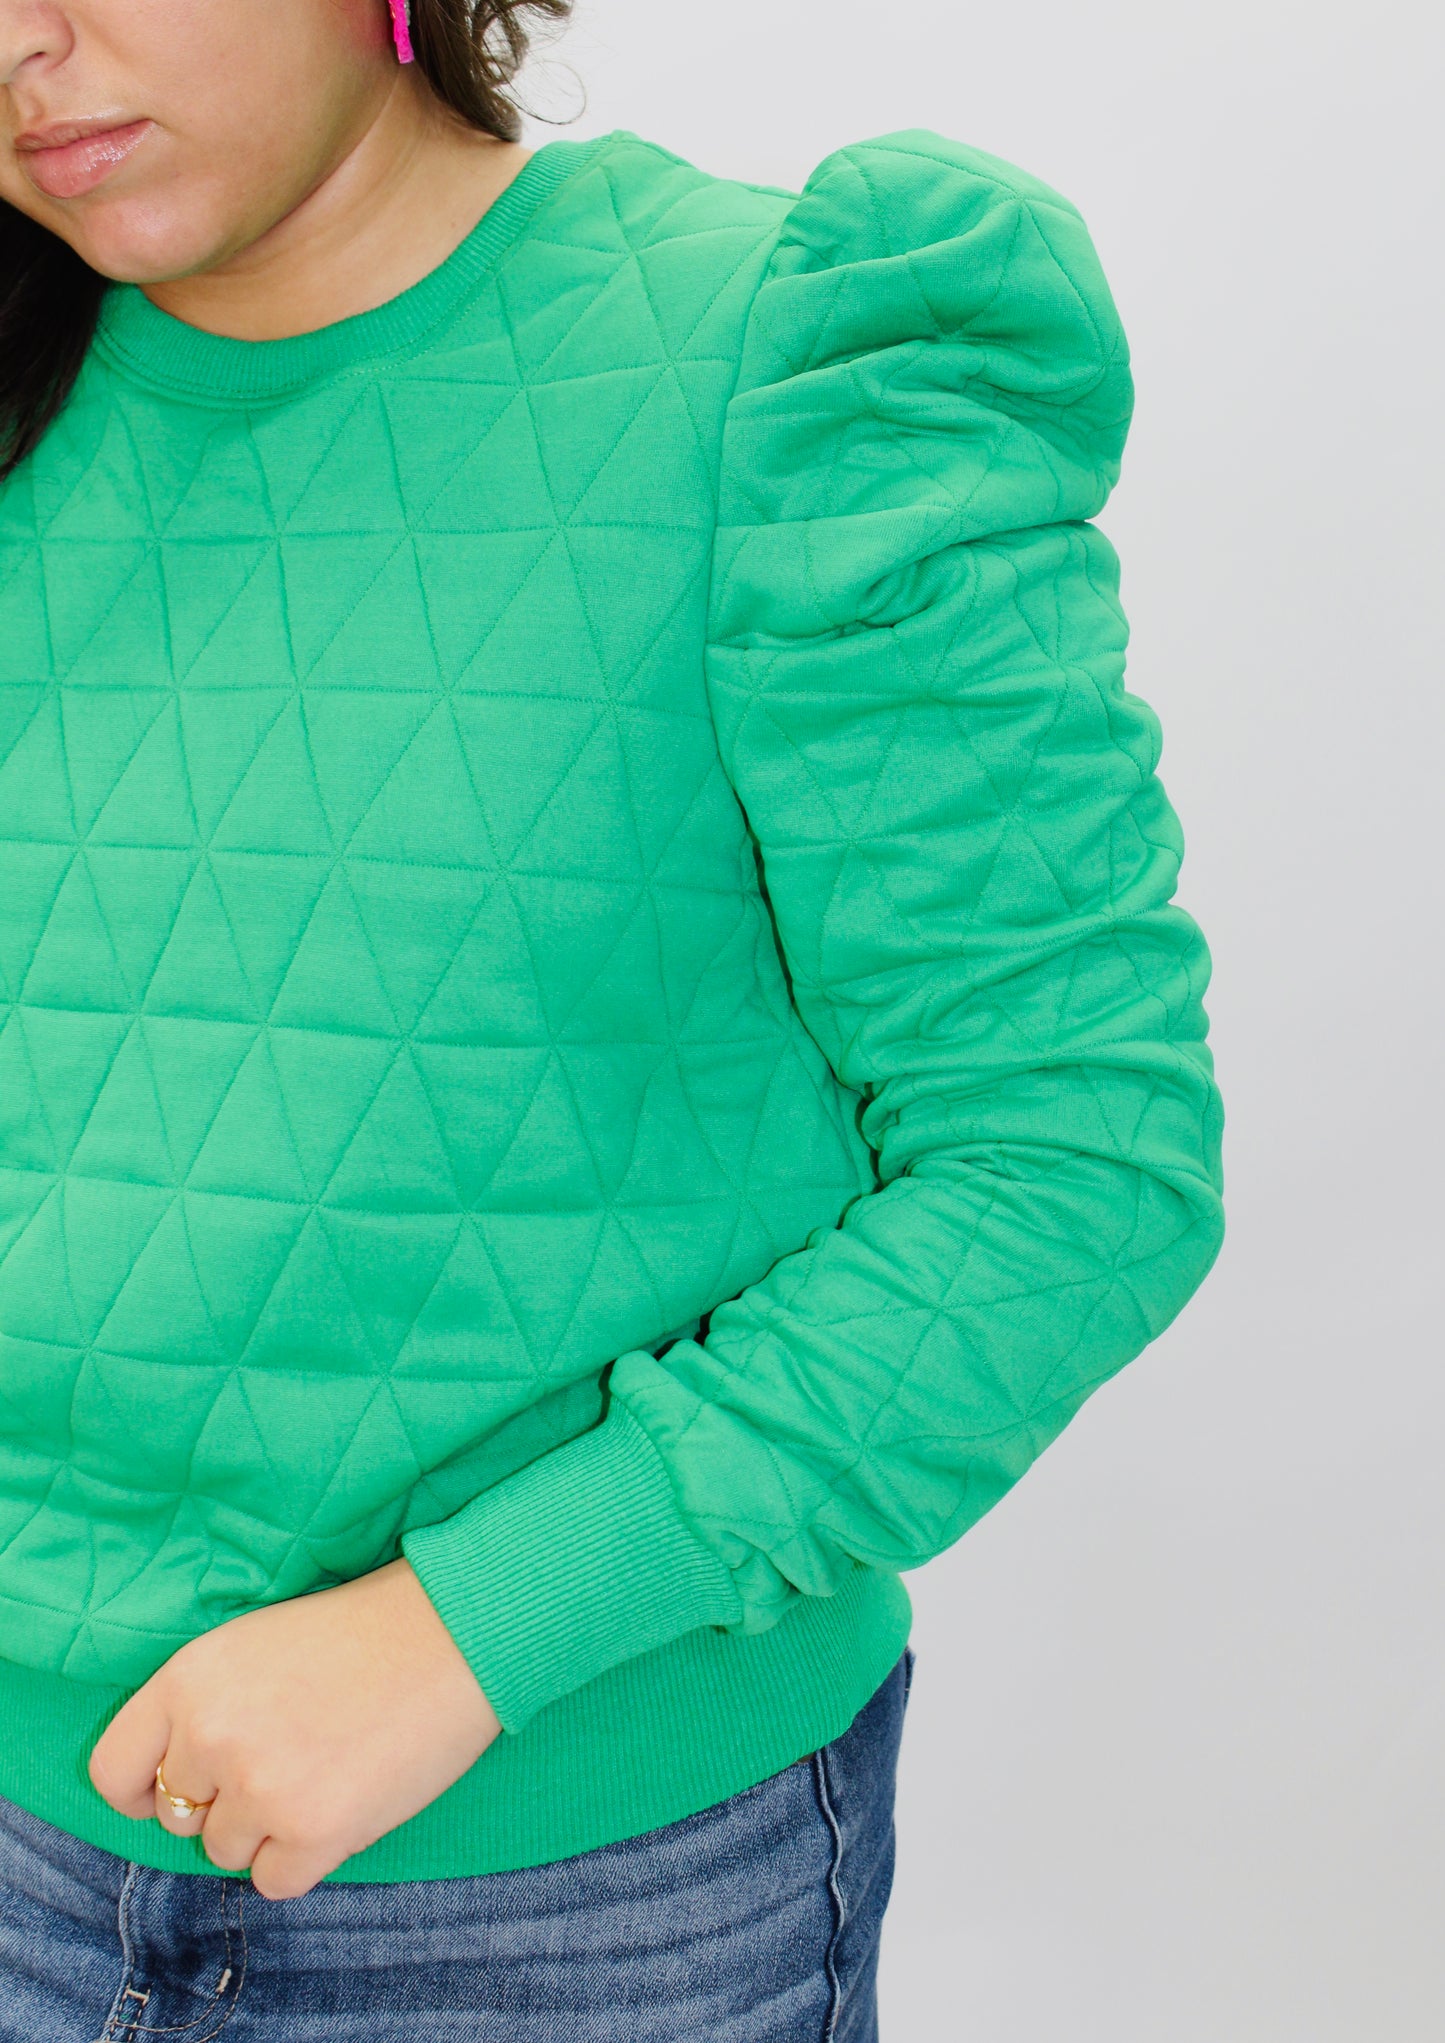 The Kelly Green Quilted Top